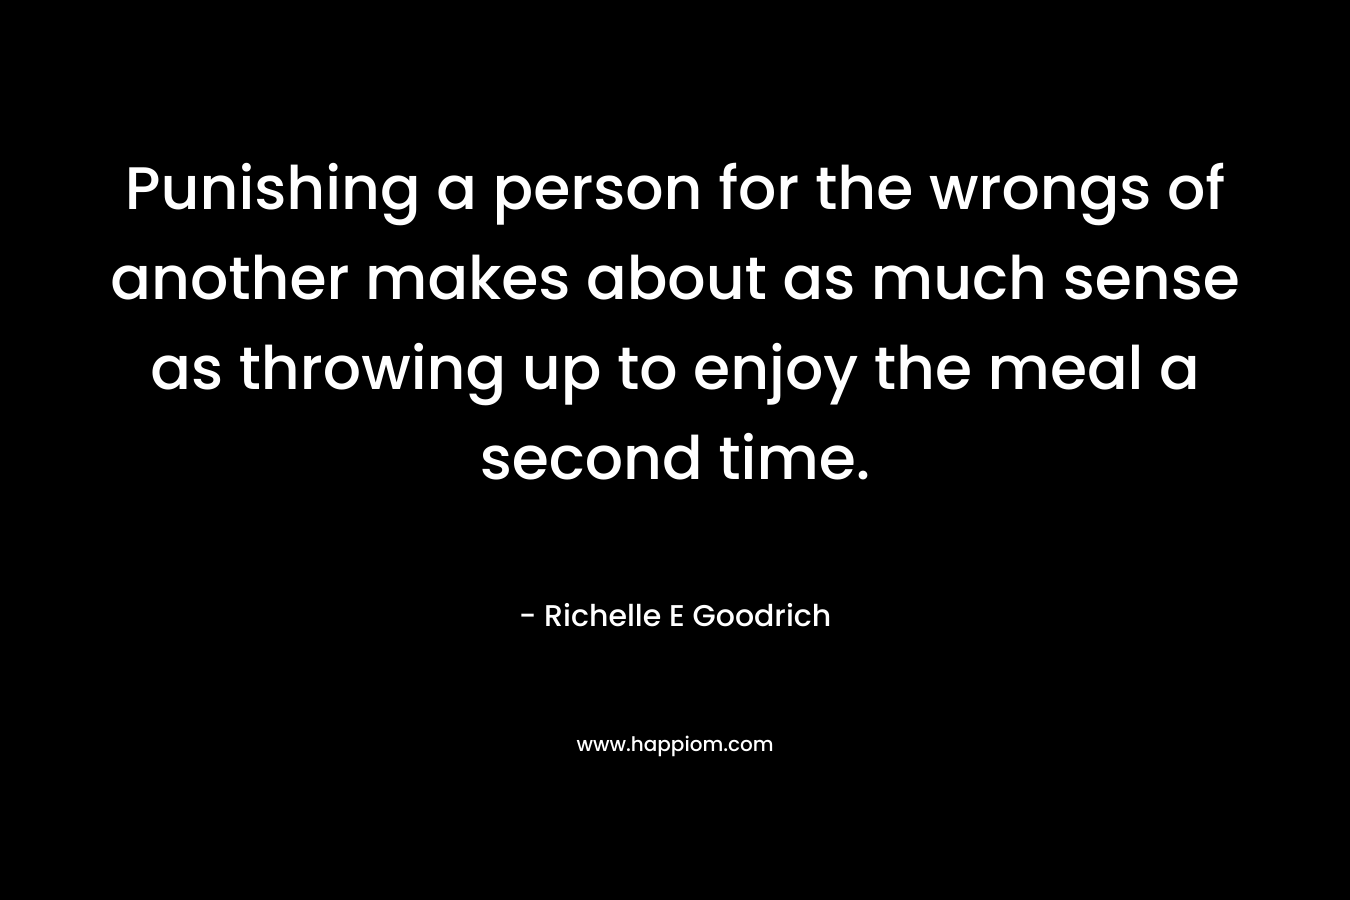 Punishing a person for the wrongs of another makes about as much sense as throwing up to enjoy the meal a second time. – Richelle E Goodrich